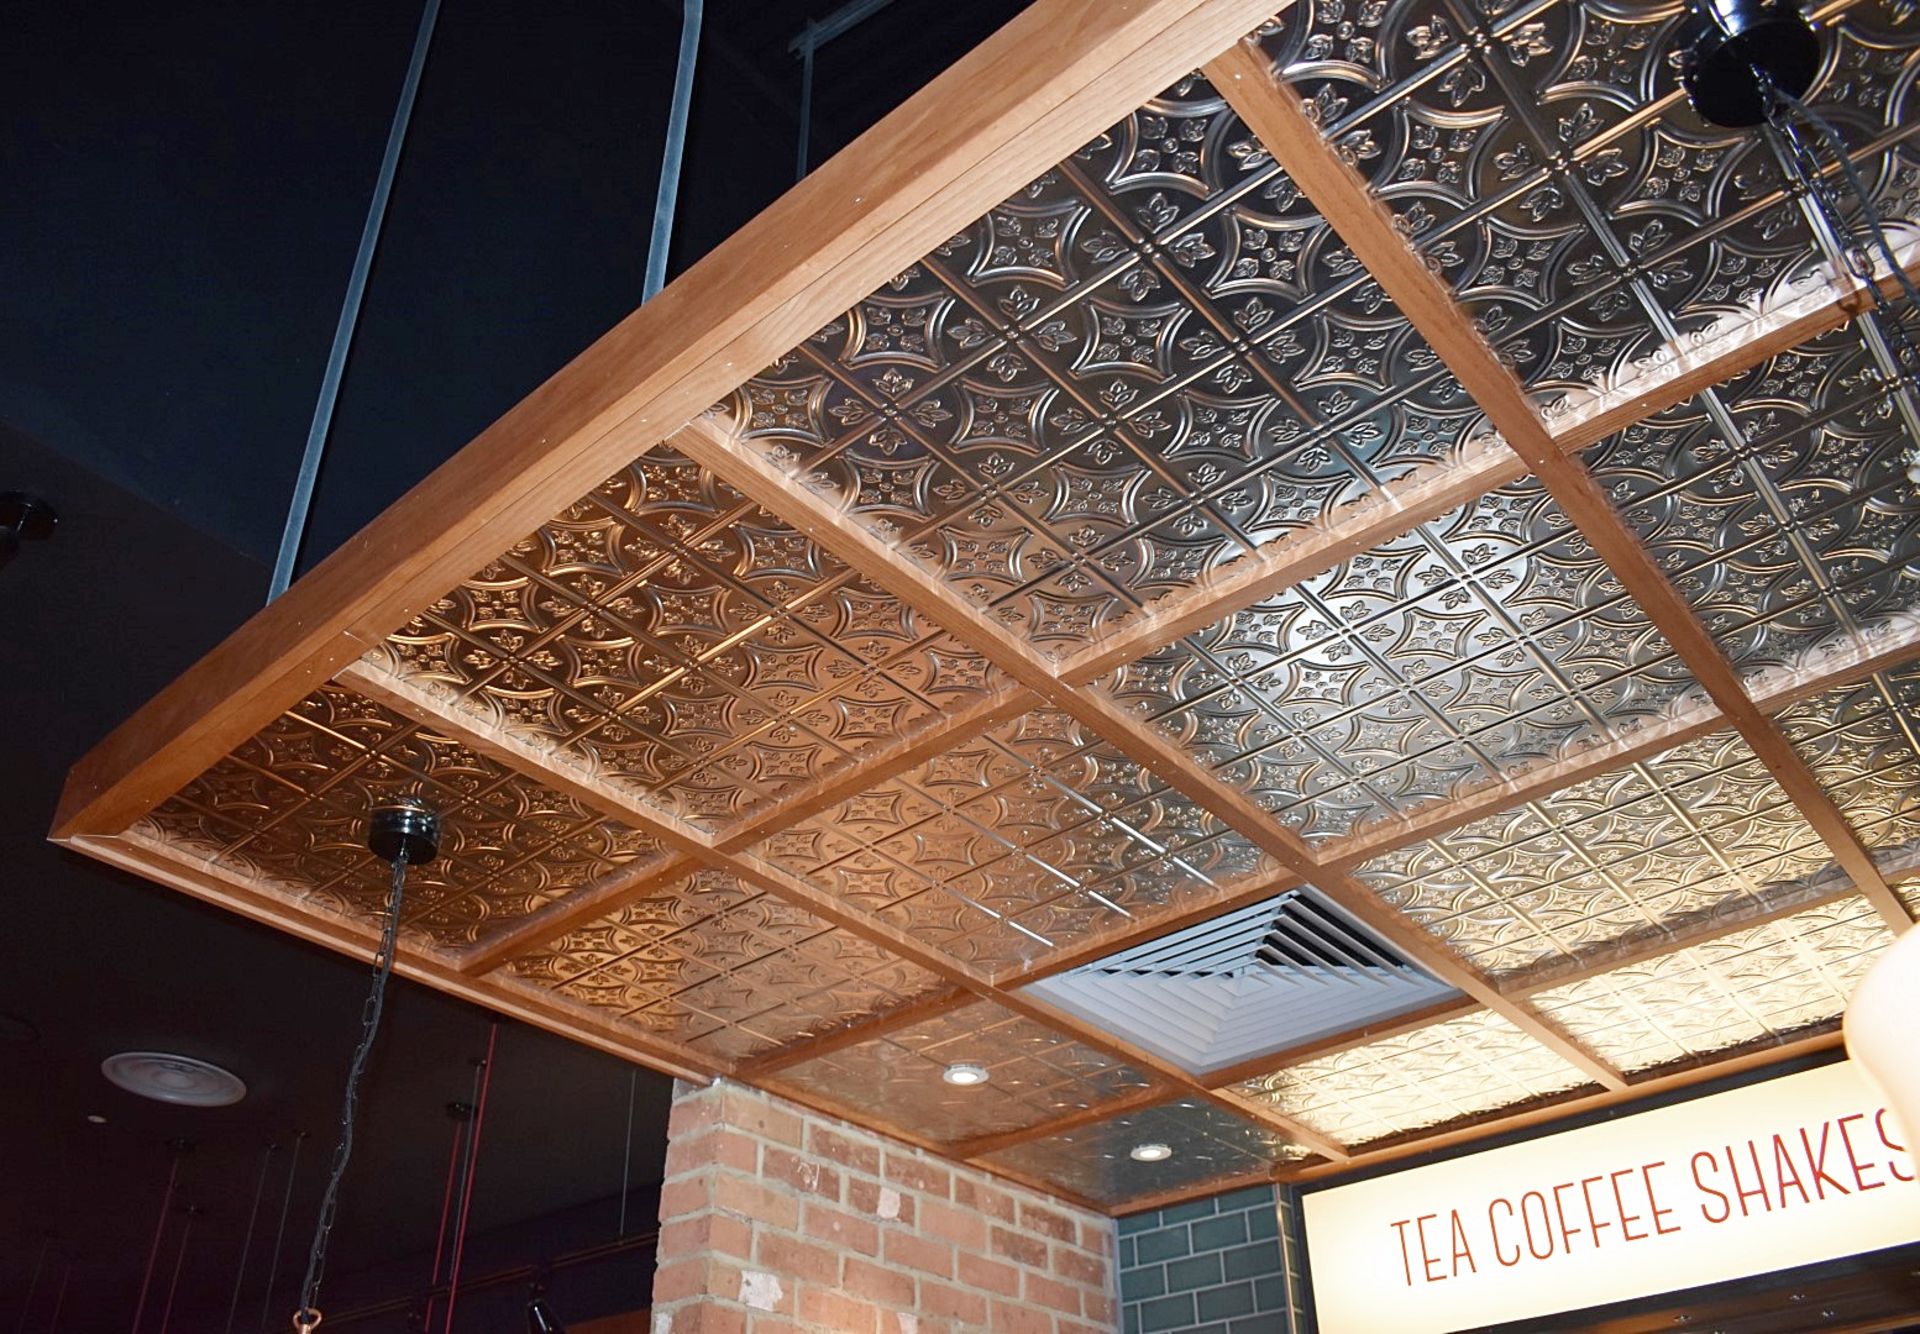 1 x Suspended Decorative Ceiling Feature With a Light Wood Frame and Ornate Tin Insert Panels - L470 - Image 5 of 12